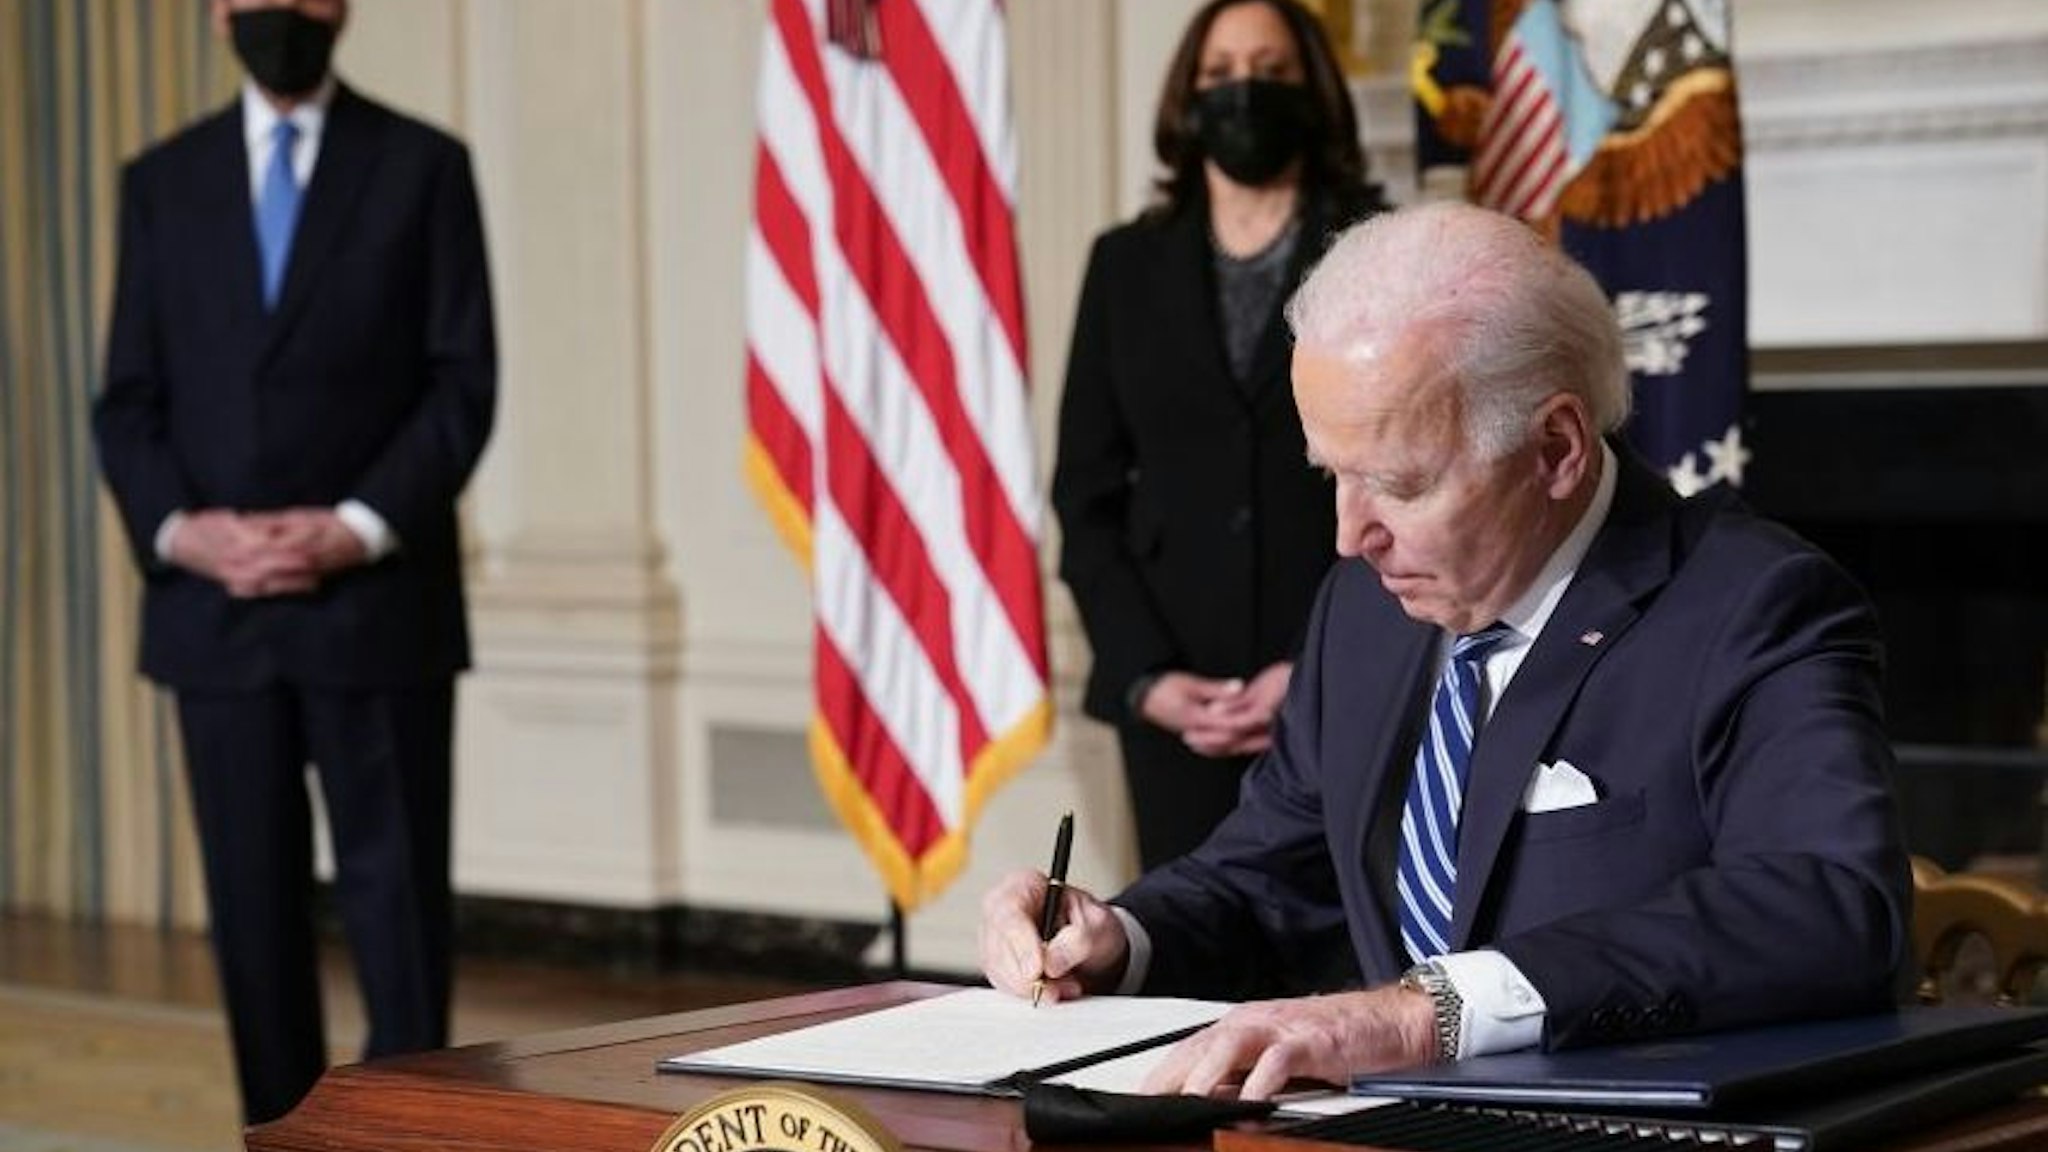 US Vice President Kamala Harris (2-L) and Special Presidential Envoy for Climate John Kerry (L) watch as US President Joe Biden signs executive orders after speaking on tackling climate change, creating jobs, and restoring scientific integrity in the State Dining Room of the White House in Washington, DC on January 27, 2021.